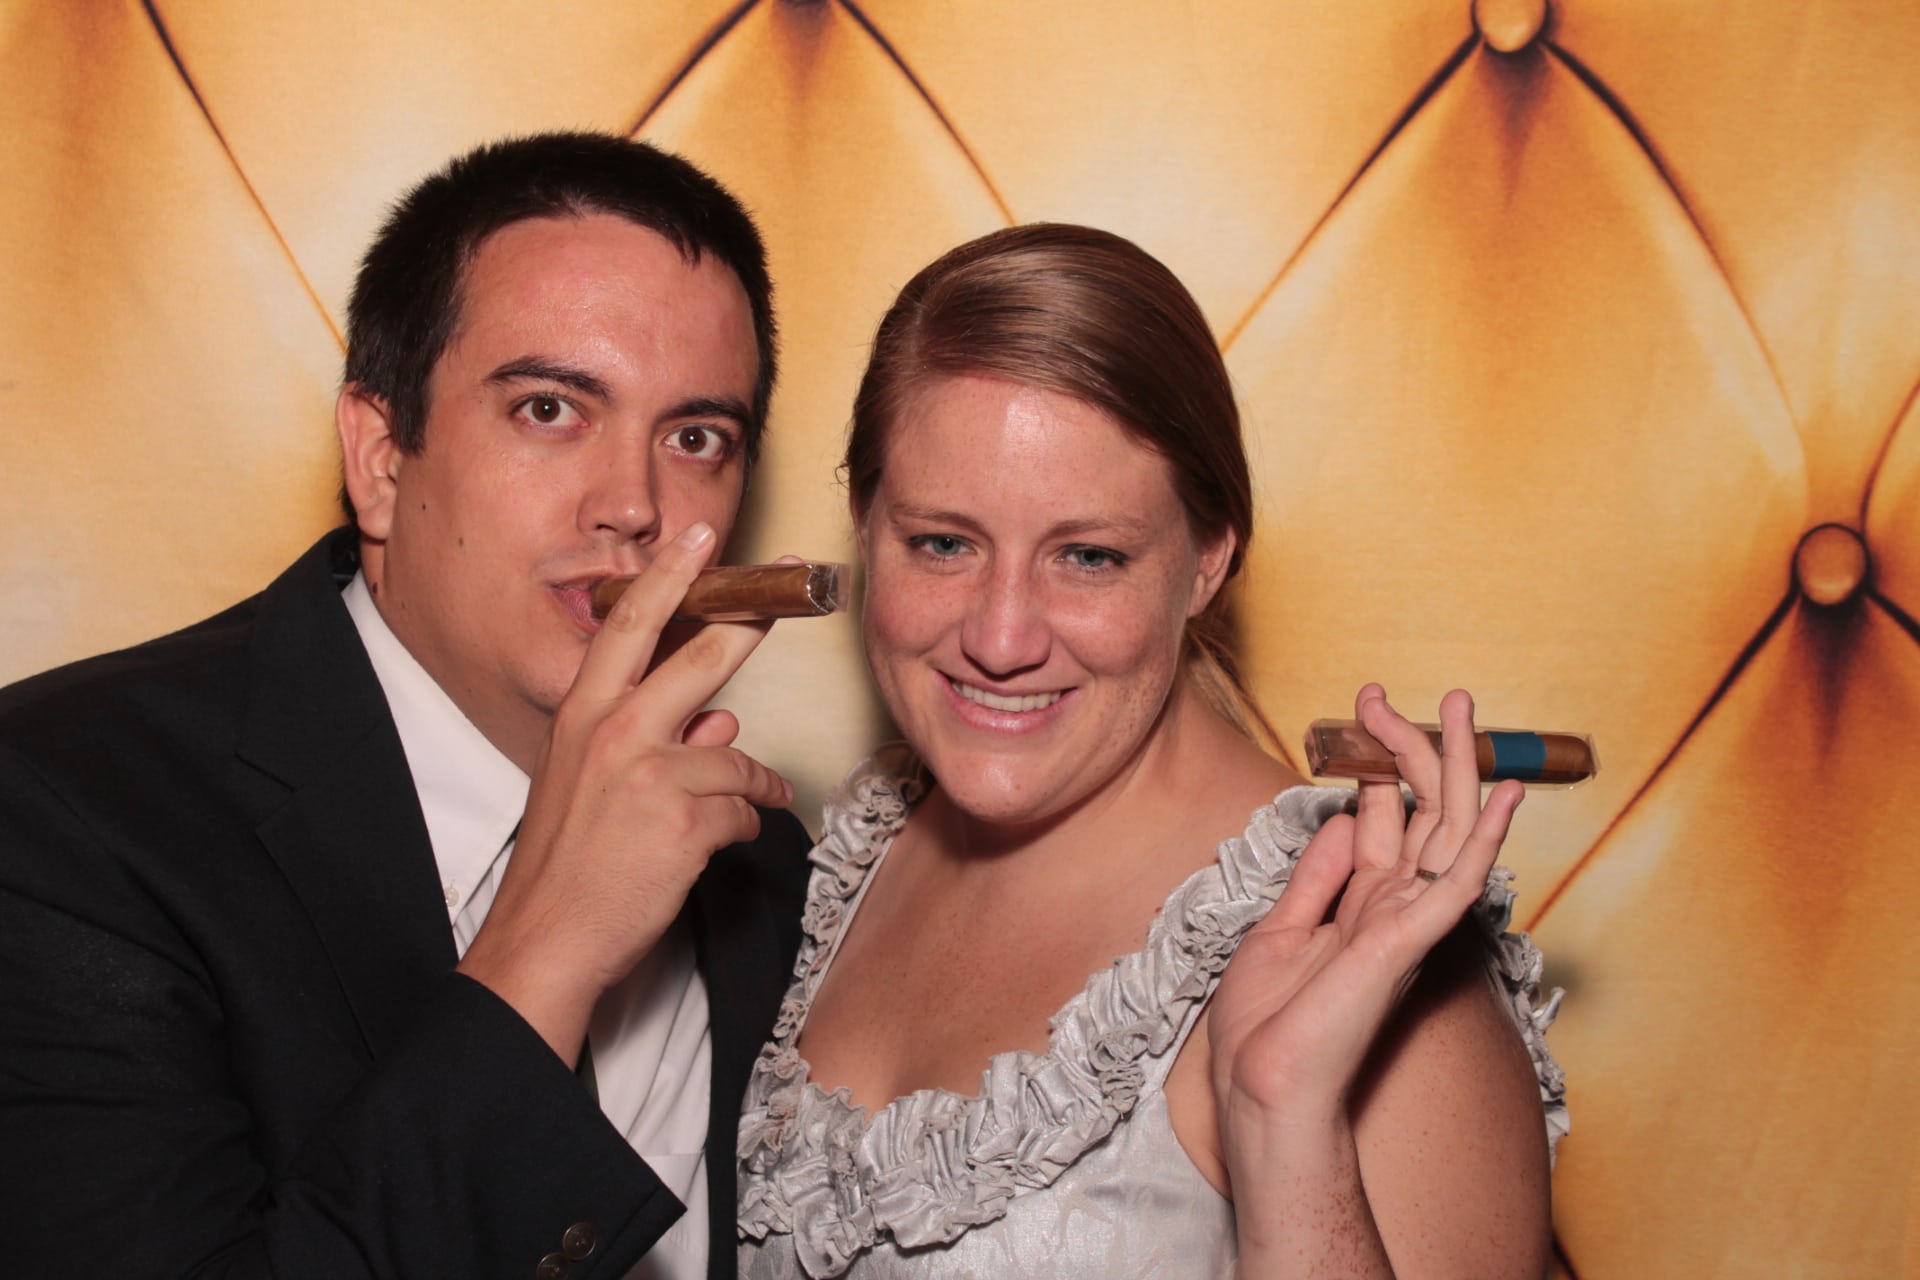 Photo Booth-Rental-Austin-Wedding-Memories-No. 1-Awesome-Props-Family-Fun-Best-Backdrop-Choices